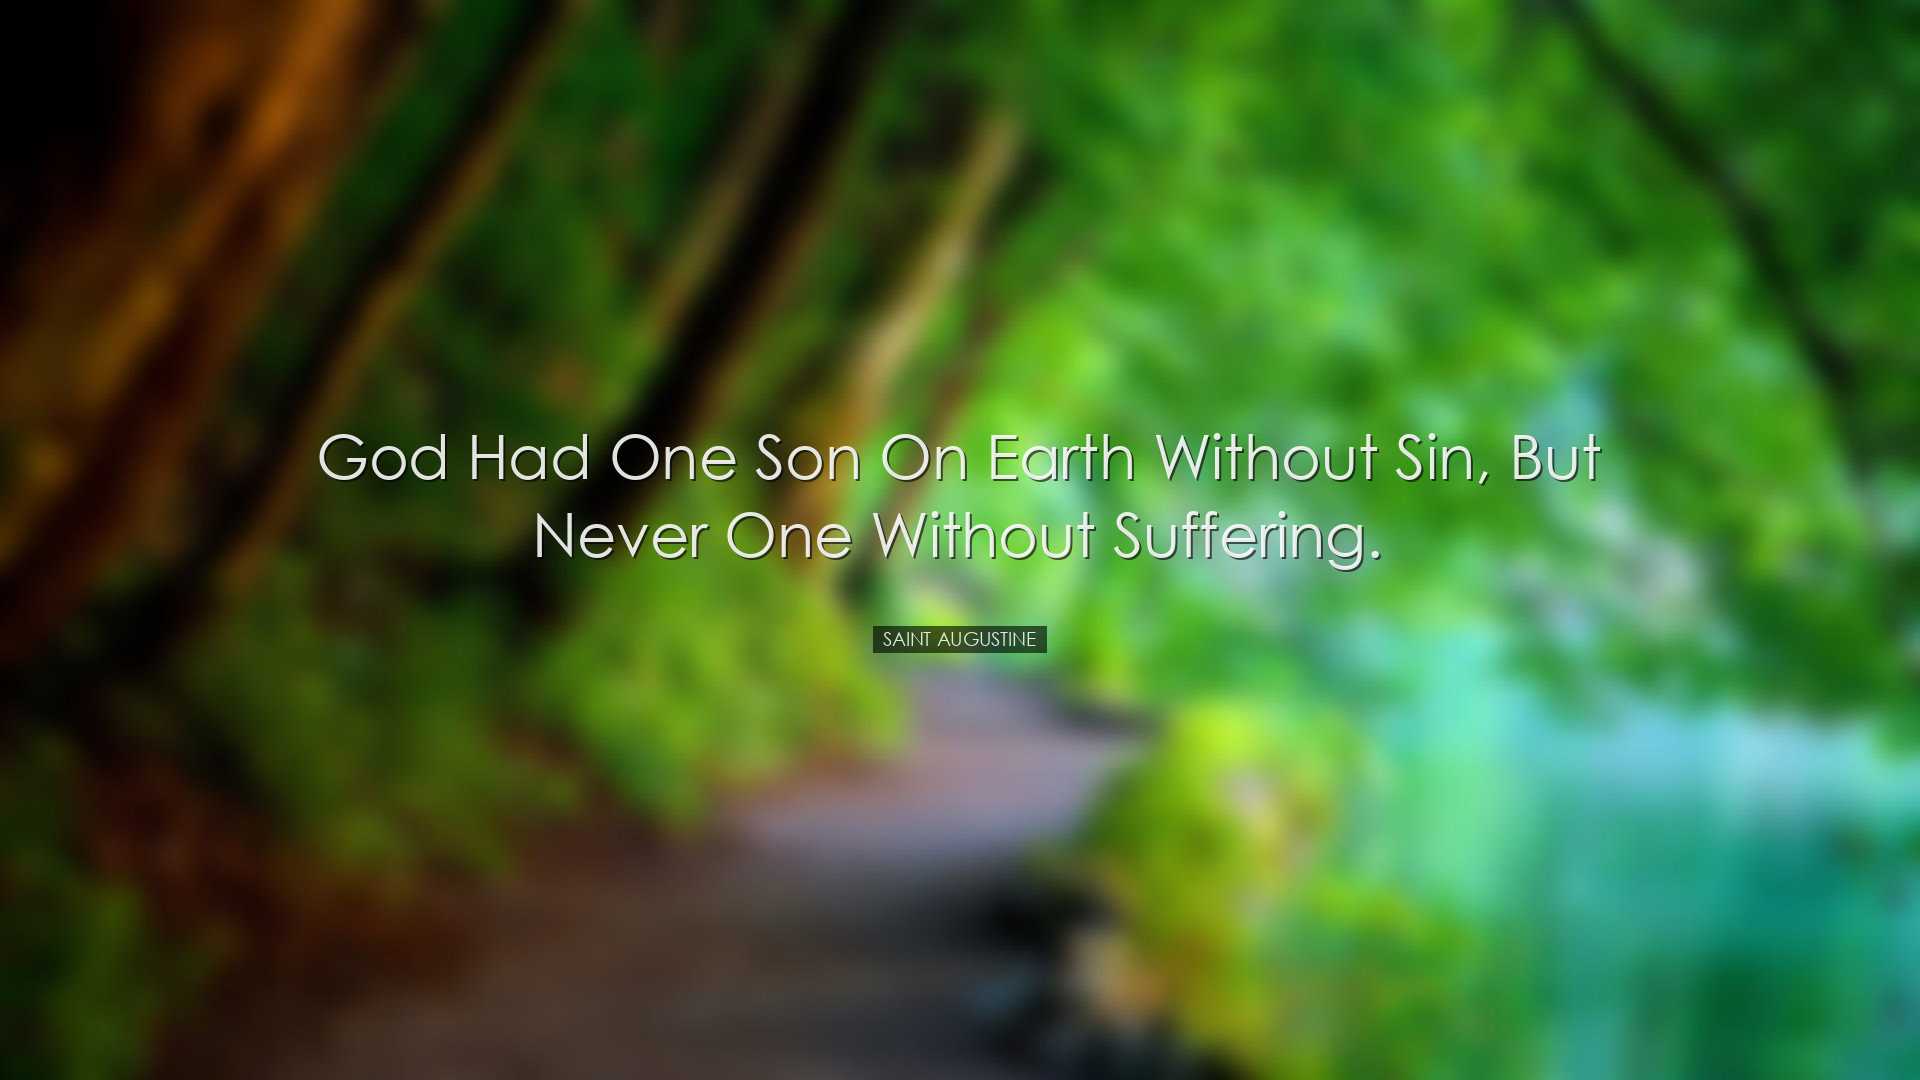 God had one son on earth without sin, but never one without suffer